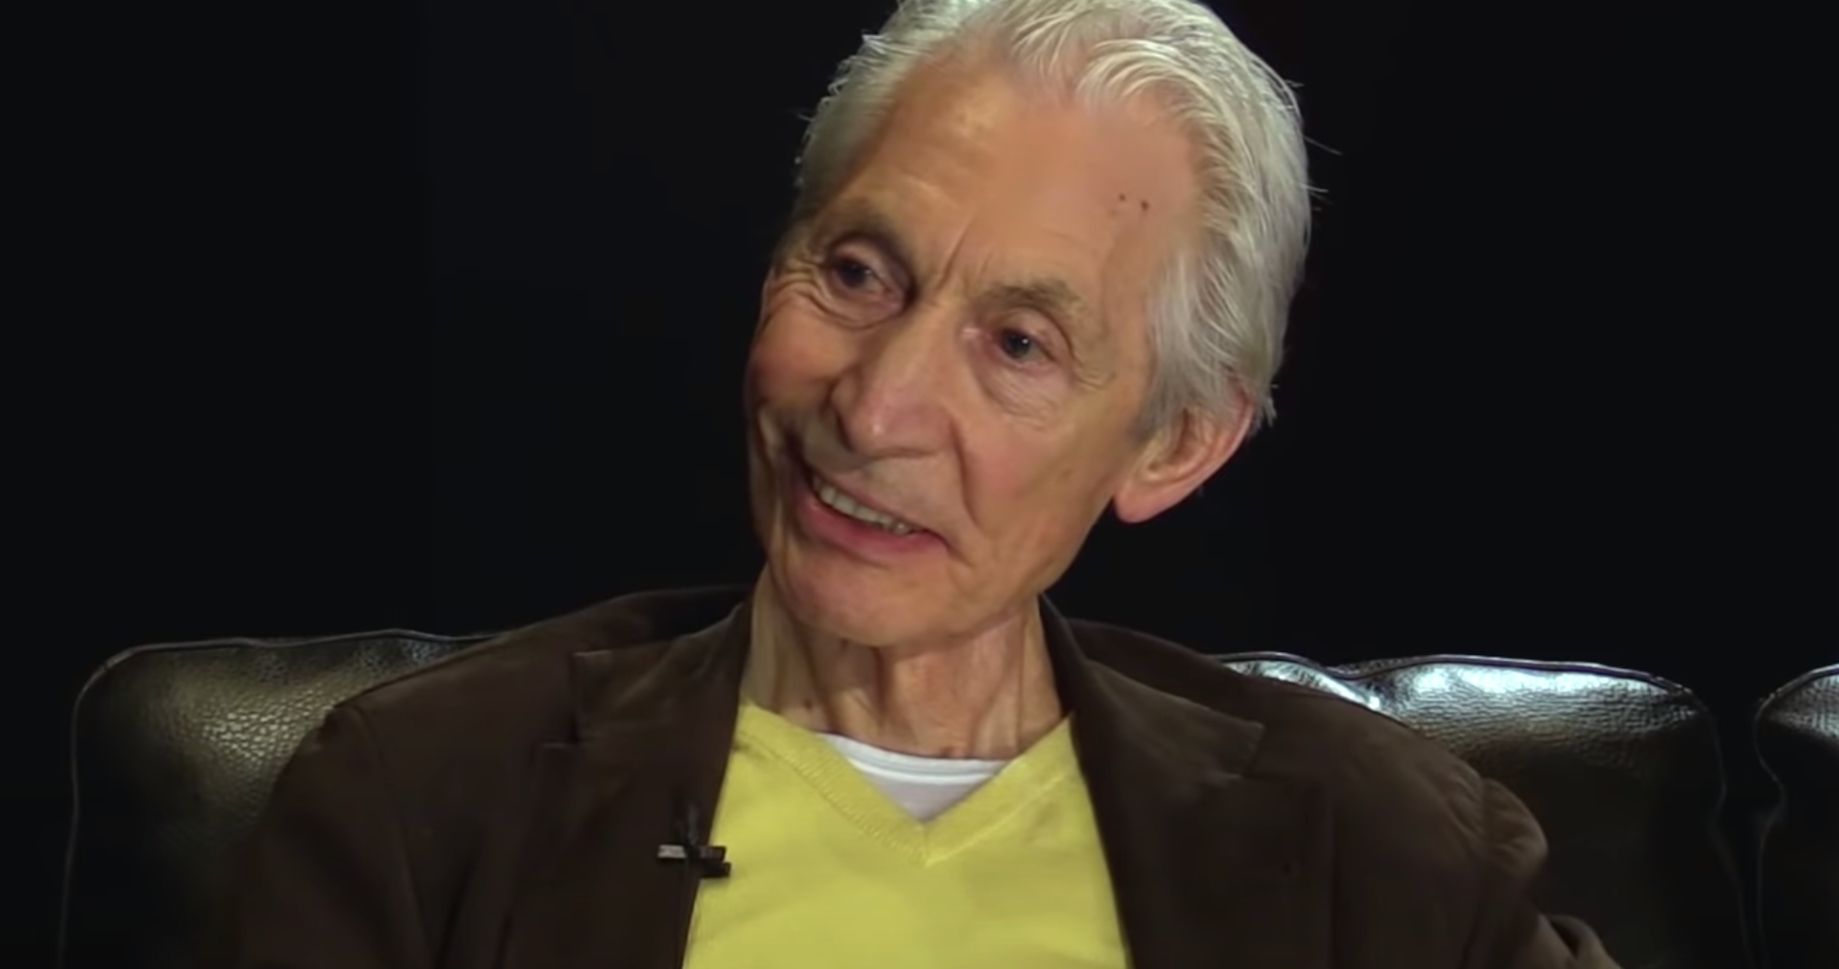 Charlie Watts Dies, Legendary Drummer for The Rolling Stones Was 80